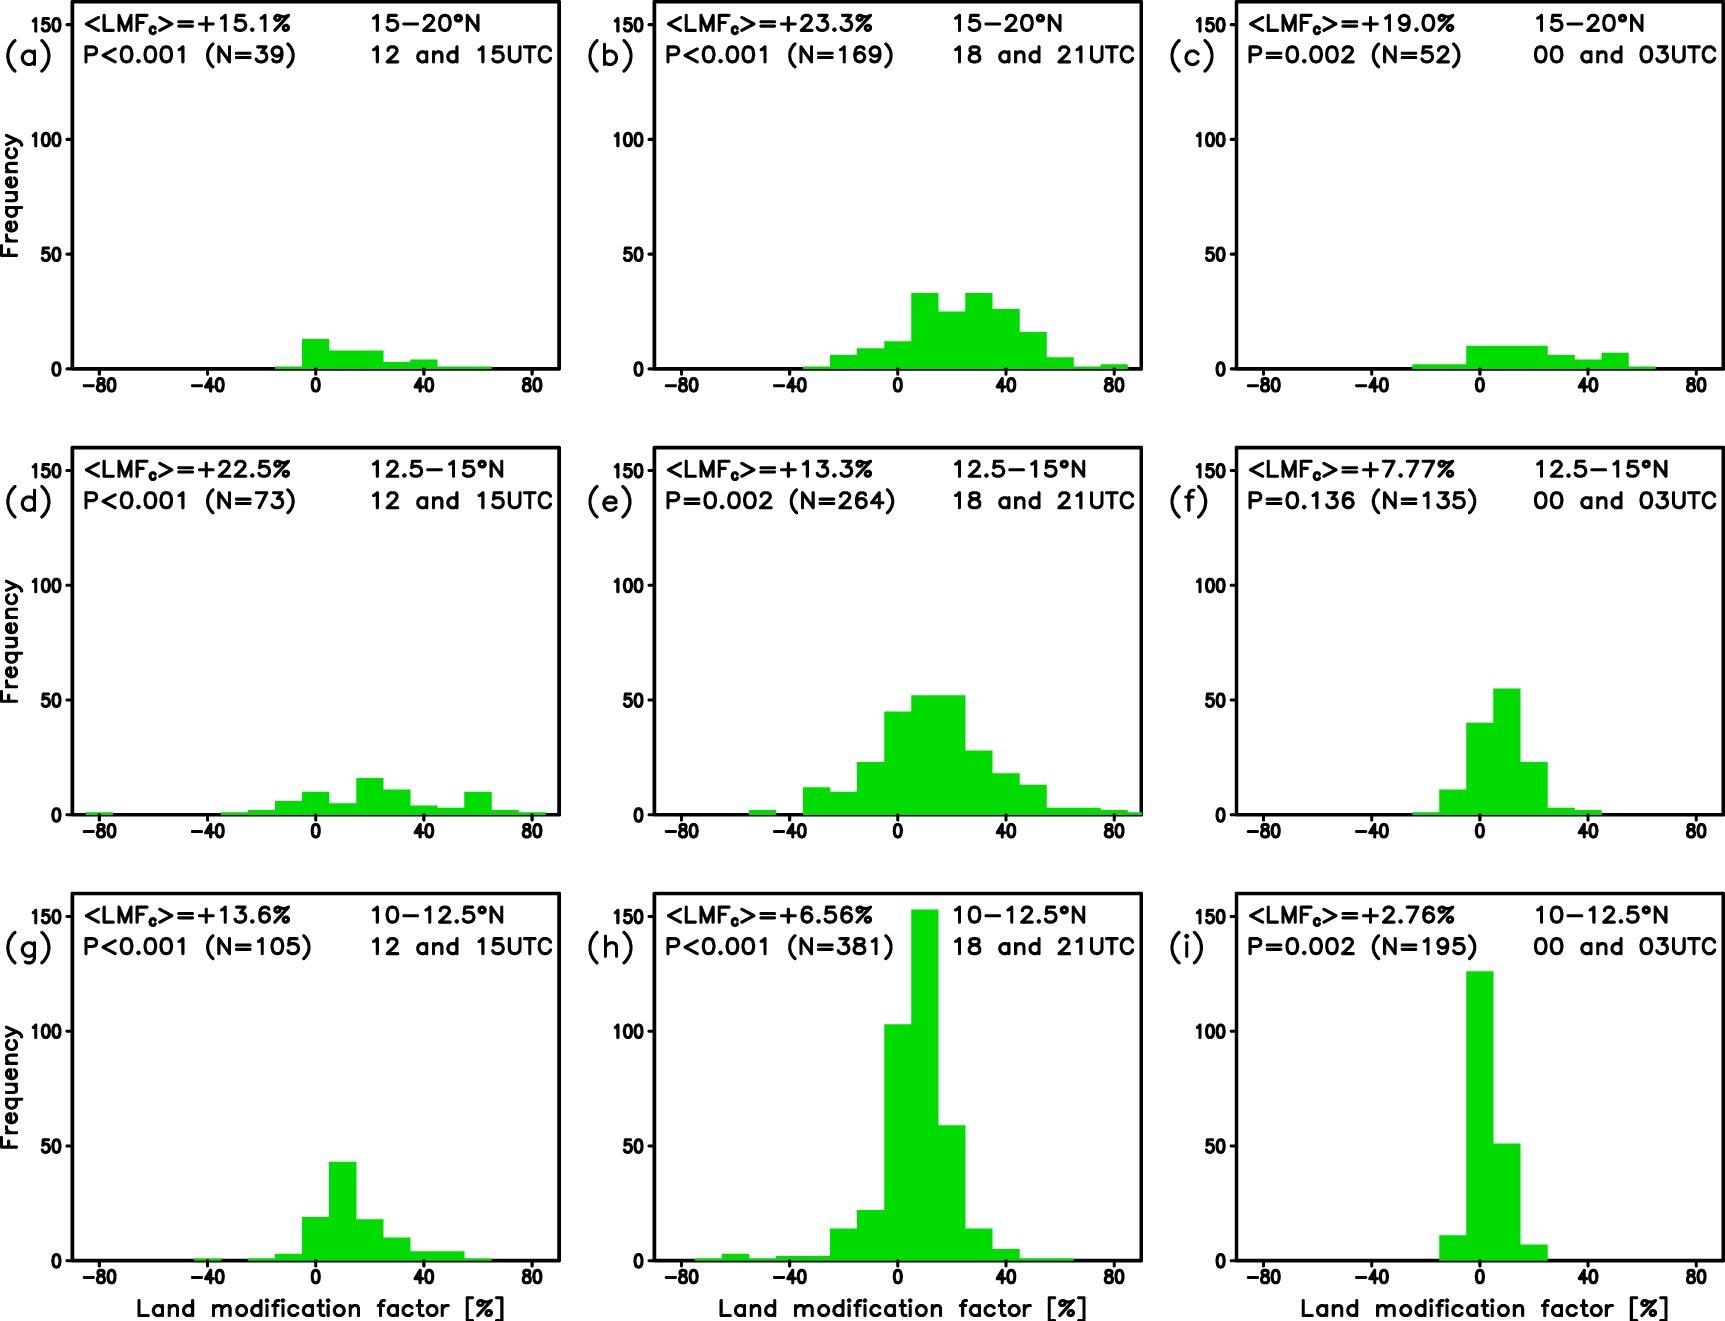 Evaluation of core frequency during September 2021. Frequency of observed cores, binned by land modification factor (green bars). The data are presented in rows by latitude band from the Northern (top) to Southern (bottom) of the Sahel. Each column combines data from two forecast hours (left: 1200 and 1500 UTC, middle 1800 and 2100 UTC, right: 0000 and 0300 UTC). Noted in each panel is the probability (P) of randomly sampling a mean LMF as large as the observed core pixel mean (<LMFC>), based on N events.